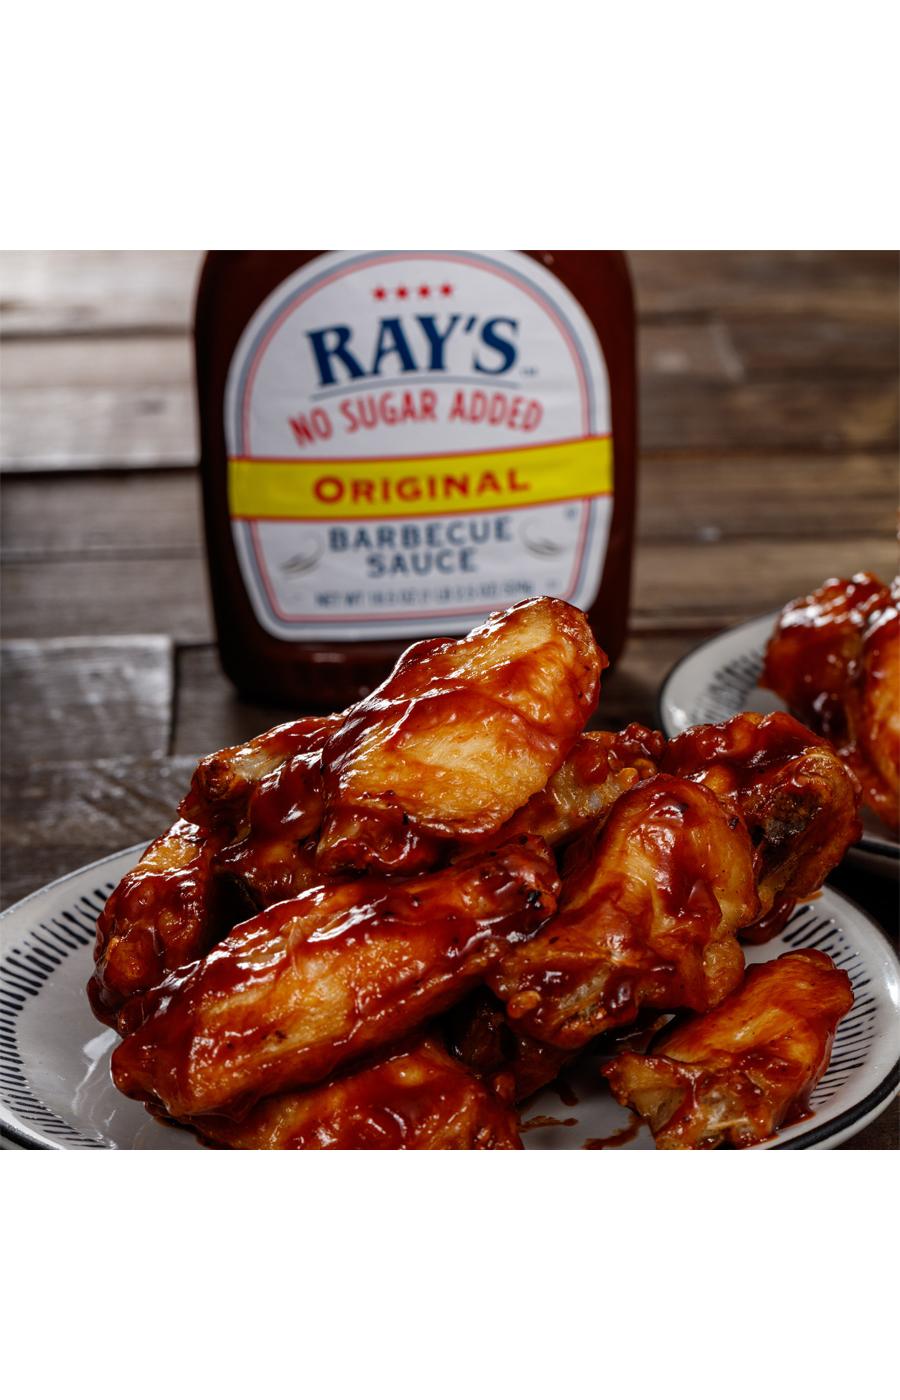 Sweet Baby Ray's No Sugar Added Original Barbecue Sauce; image 3 of 3